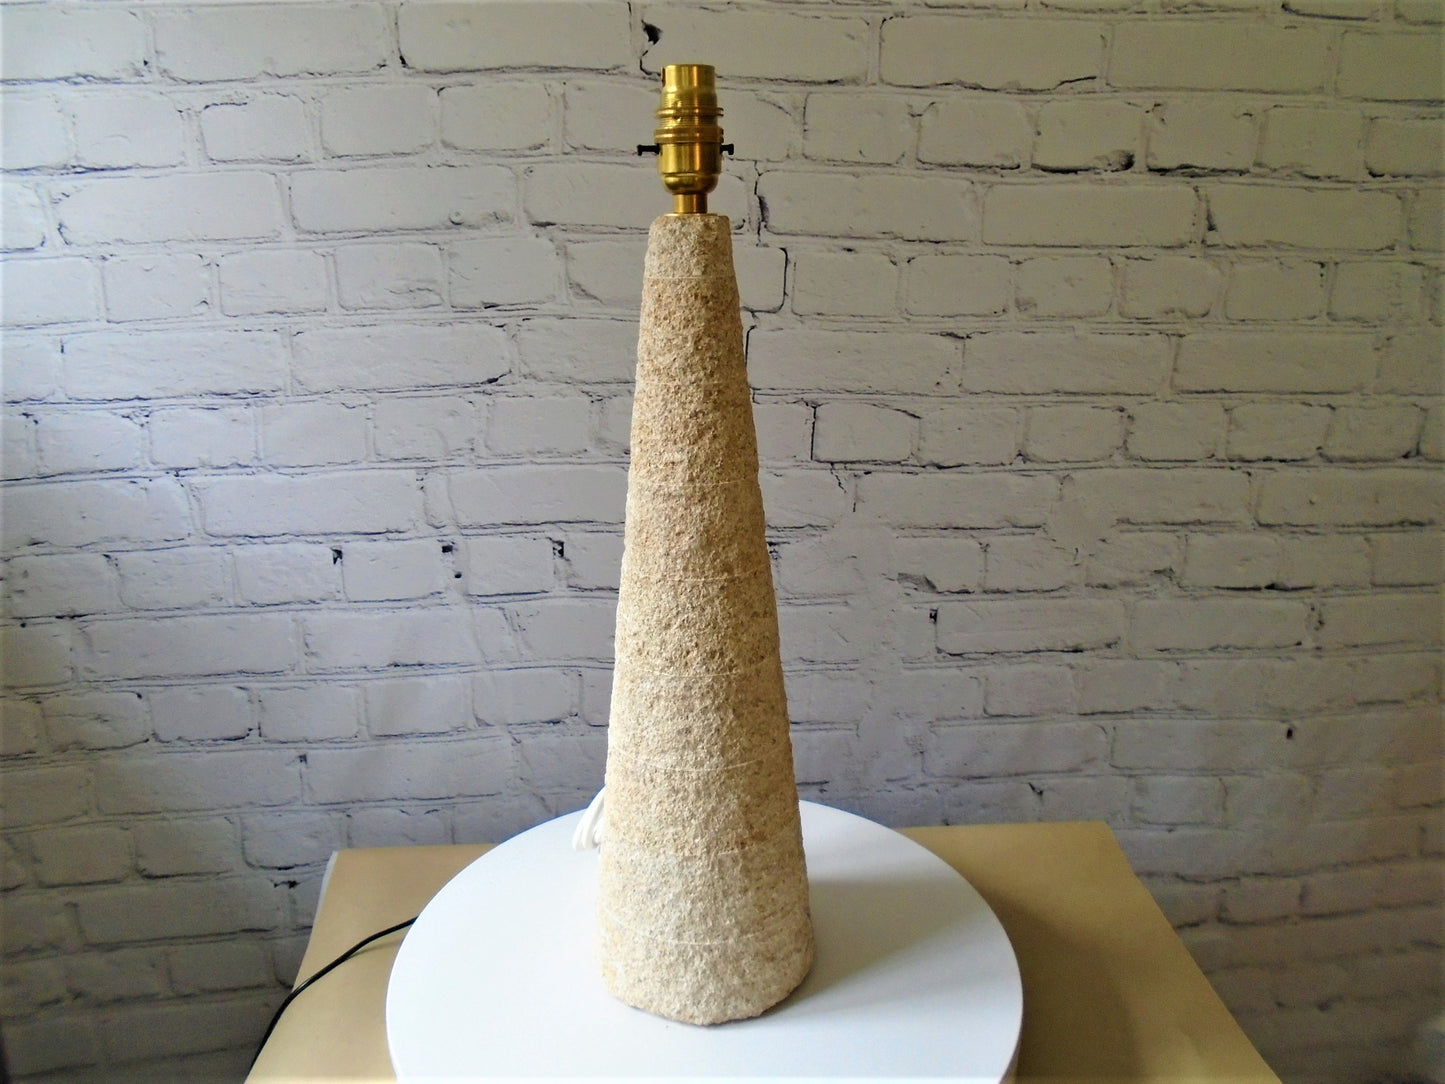 Conical Stone Lamp Base with a Rustic Textured Finish